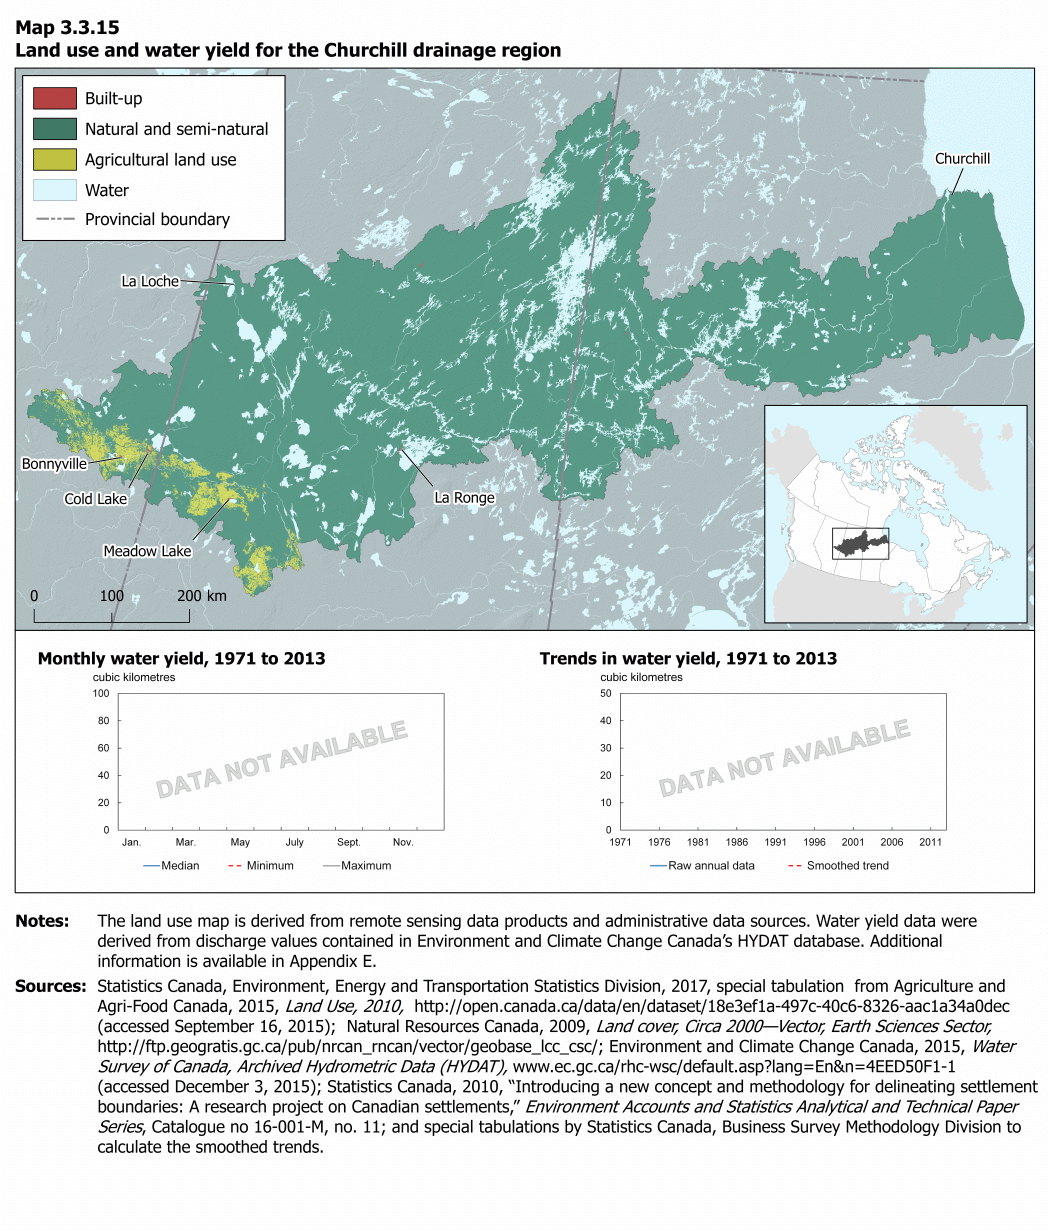 Map 3.3.15 Land use and water yield for the Churchill drainage region